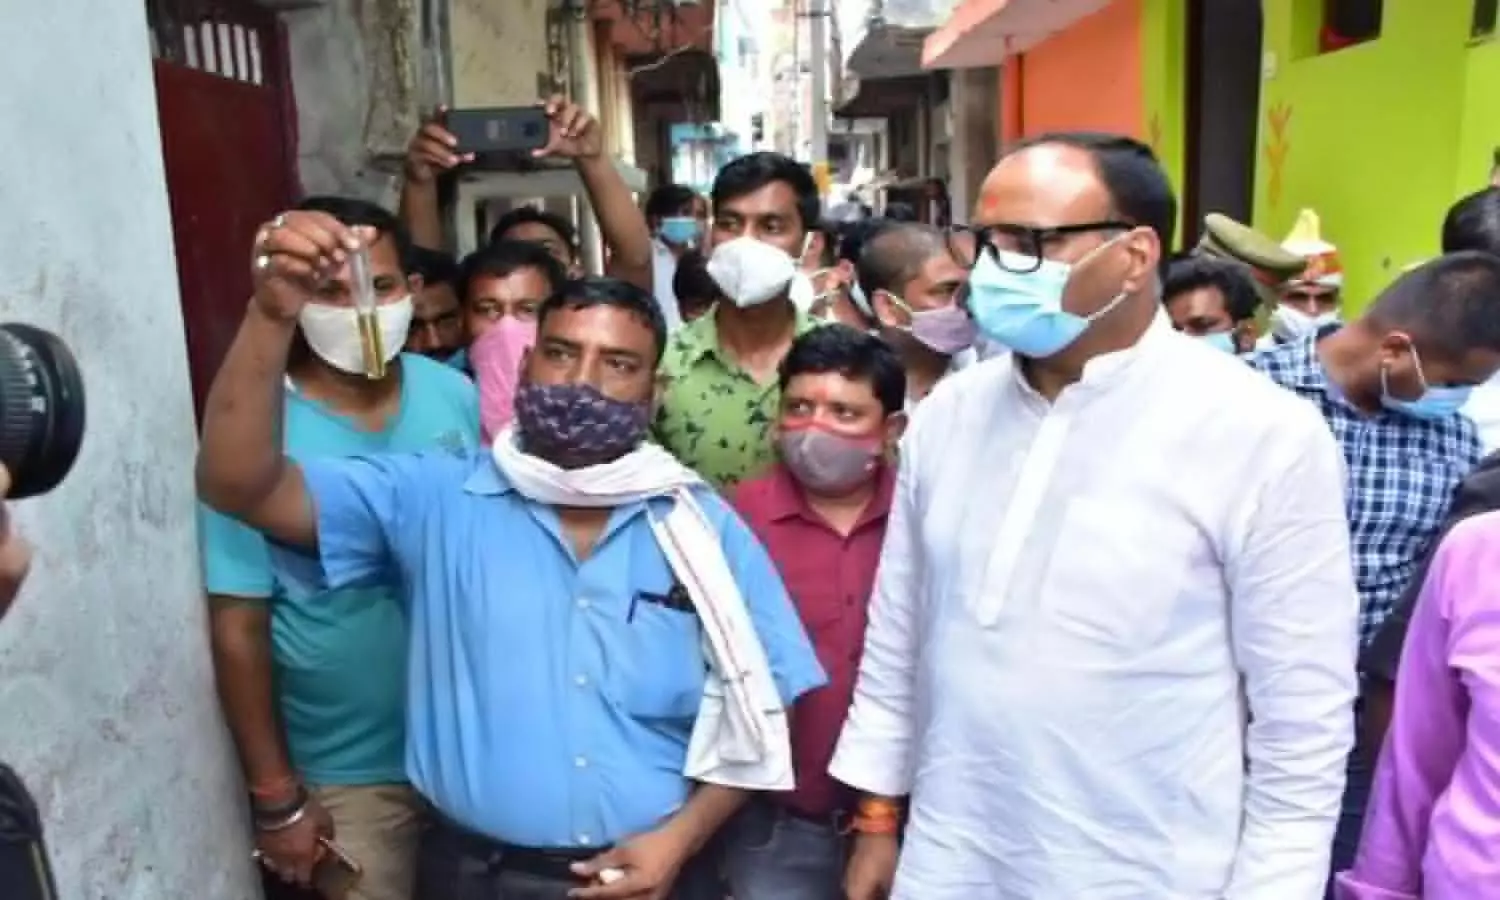 After two deaths due to diarrhea outbreak in the capitals sand base, regional MLA and cabinet minister in the UP government Brijesh Pathak inspected the sand base area.